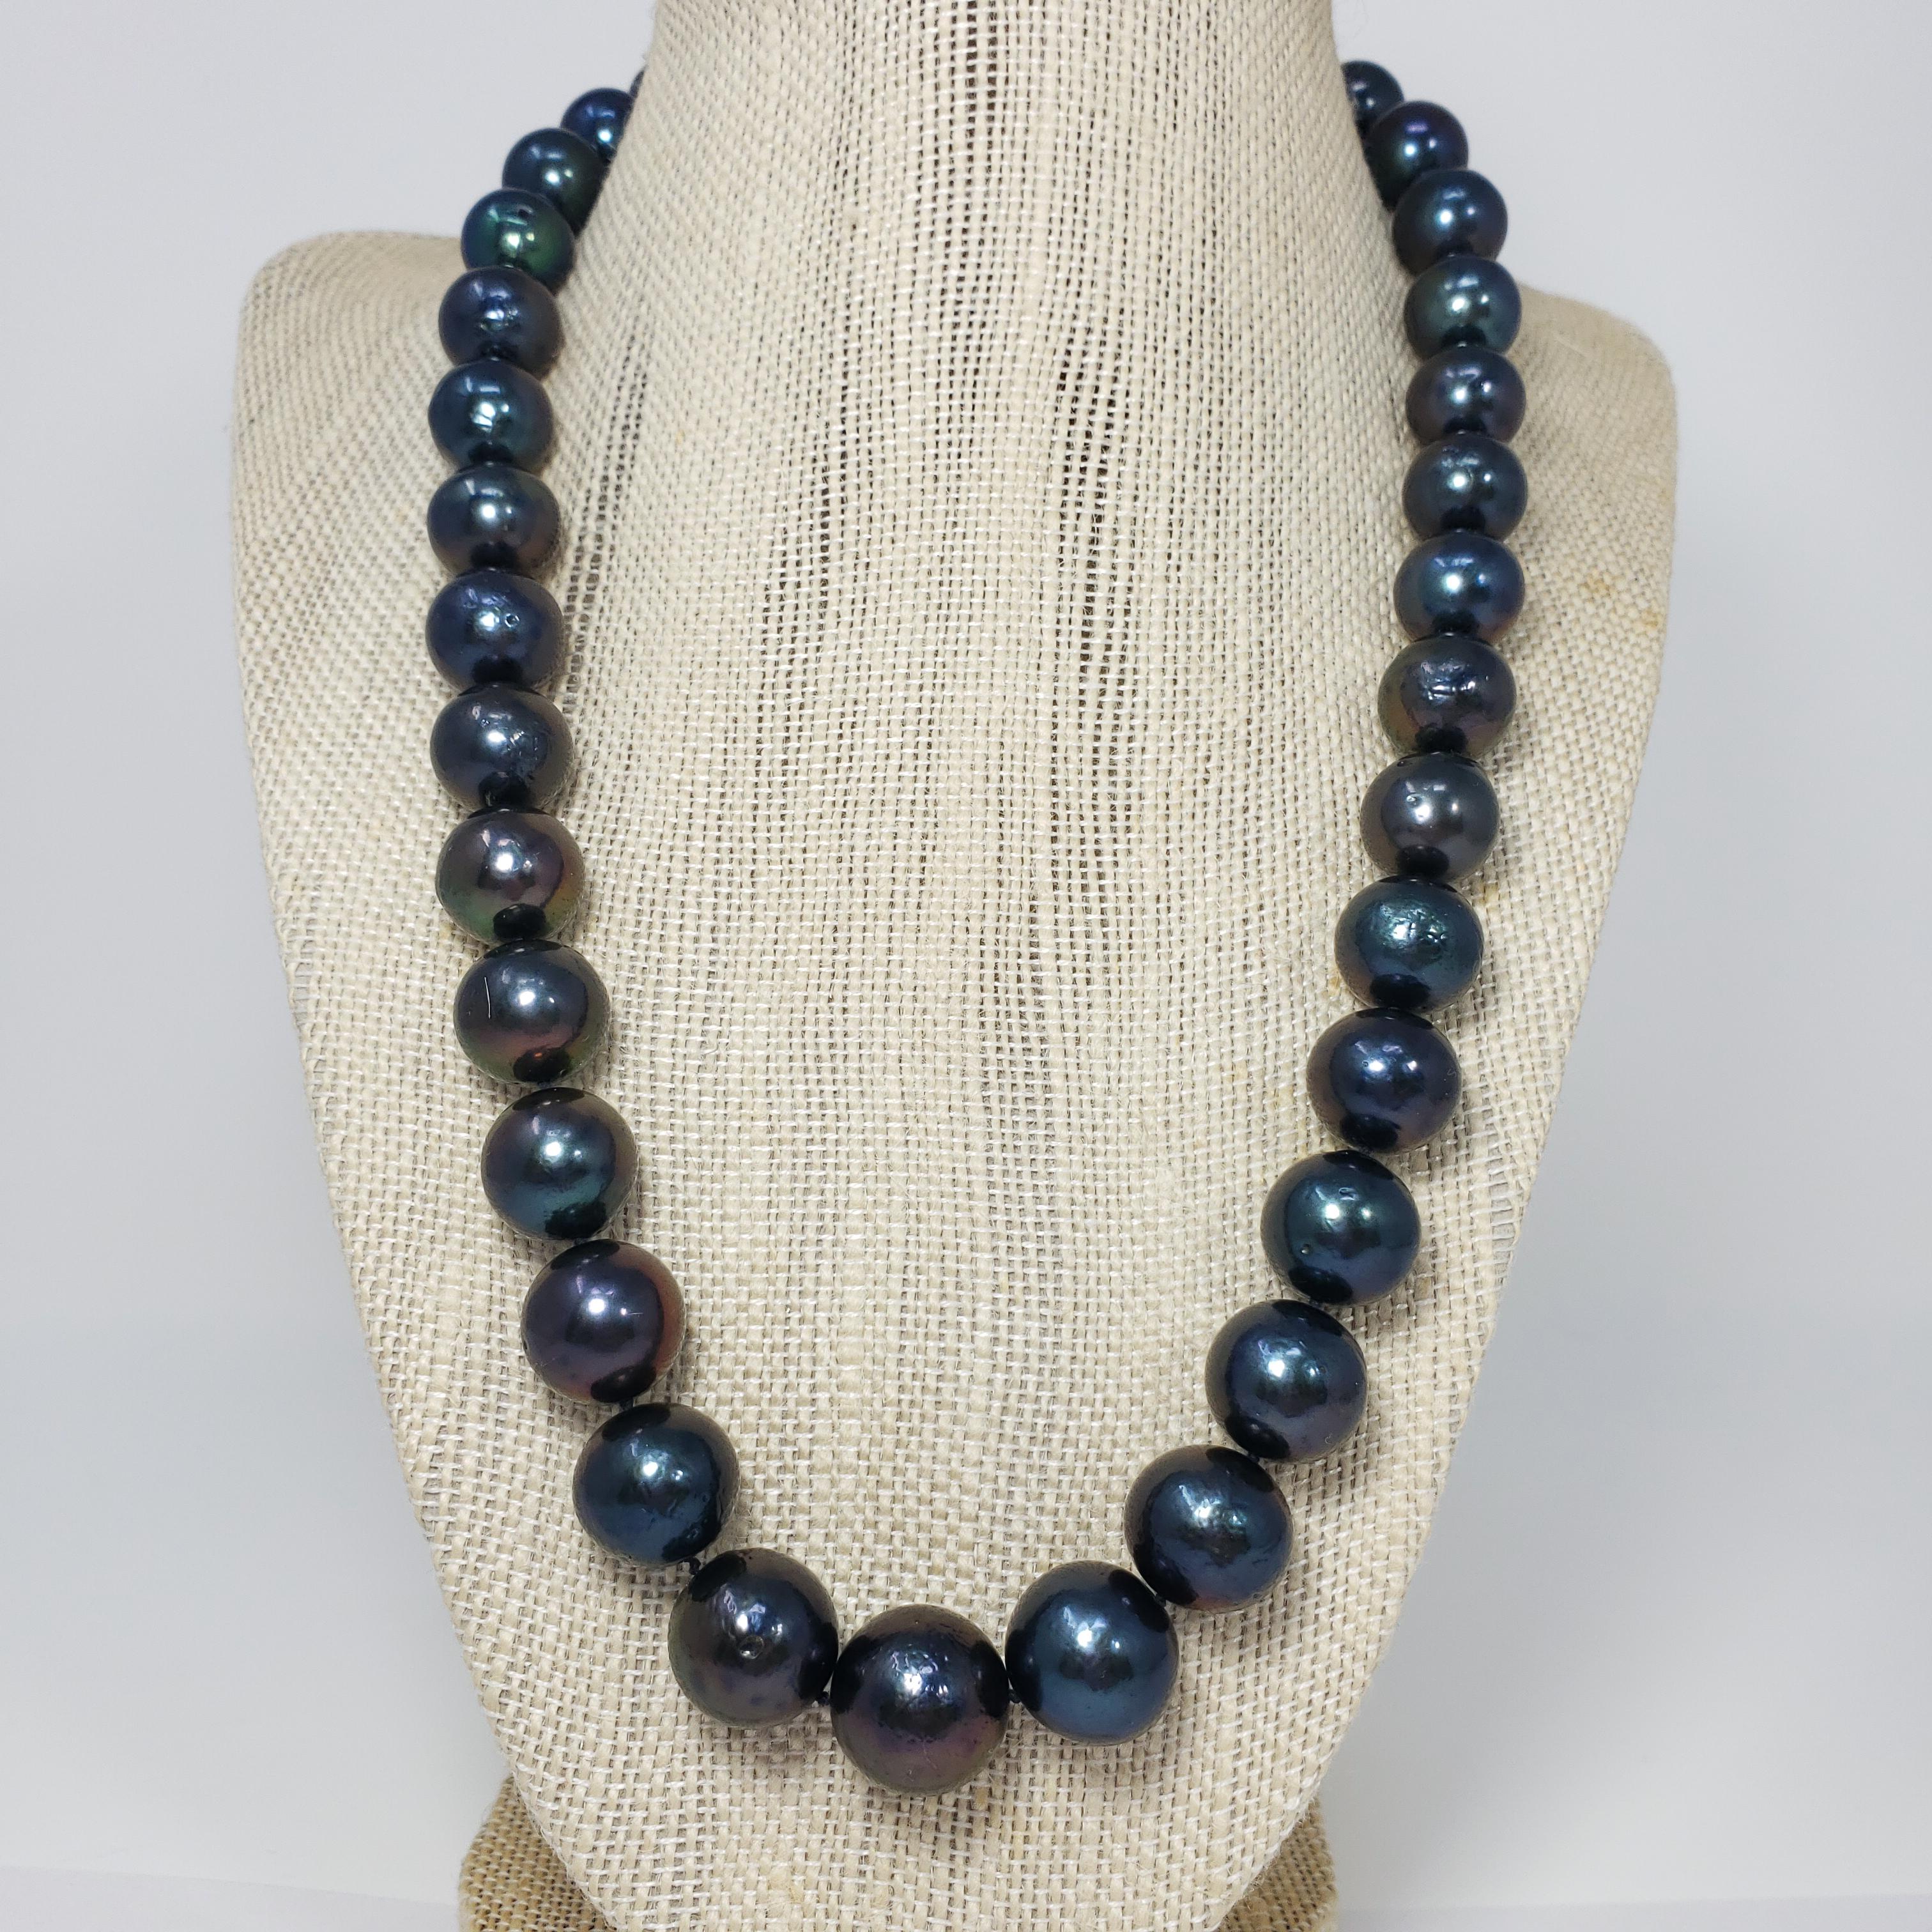 A sophisticated strand of grduated Tahitian pearls with a dark blue-green tint, accented with a sterling silver clasp. This necklace is sleek and sophisticated!

Hallmarks: 925
Pearls range from 11.6mm to 15mm in diameter